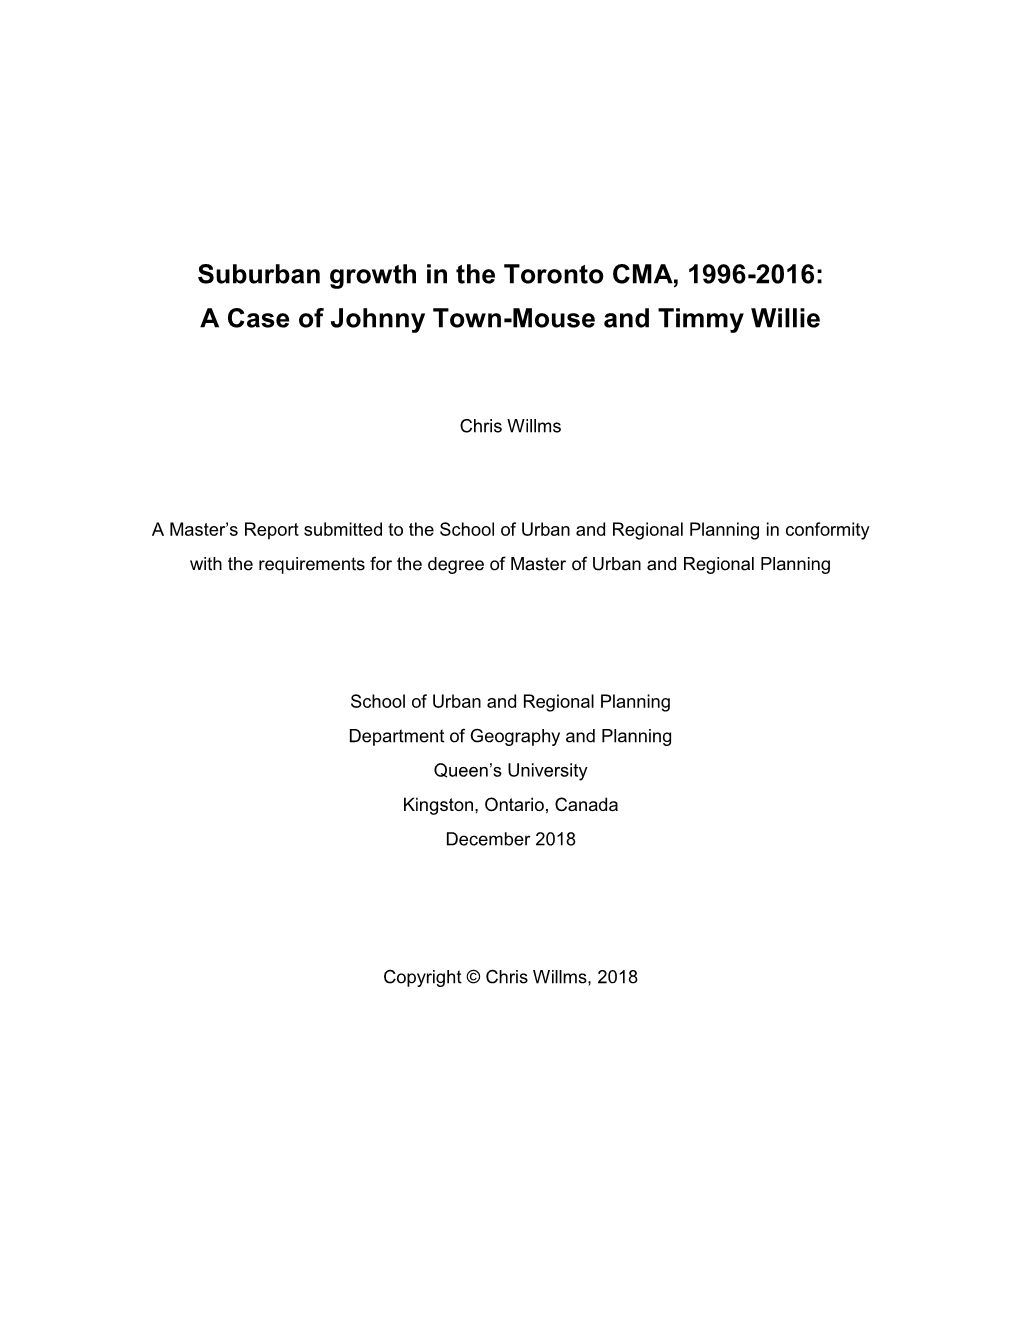 Suburban Growth in the Toronto CMA, 1996-2016: a Case of Johnny Town-Mouse and Timmy Willie